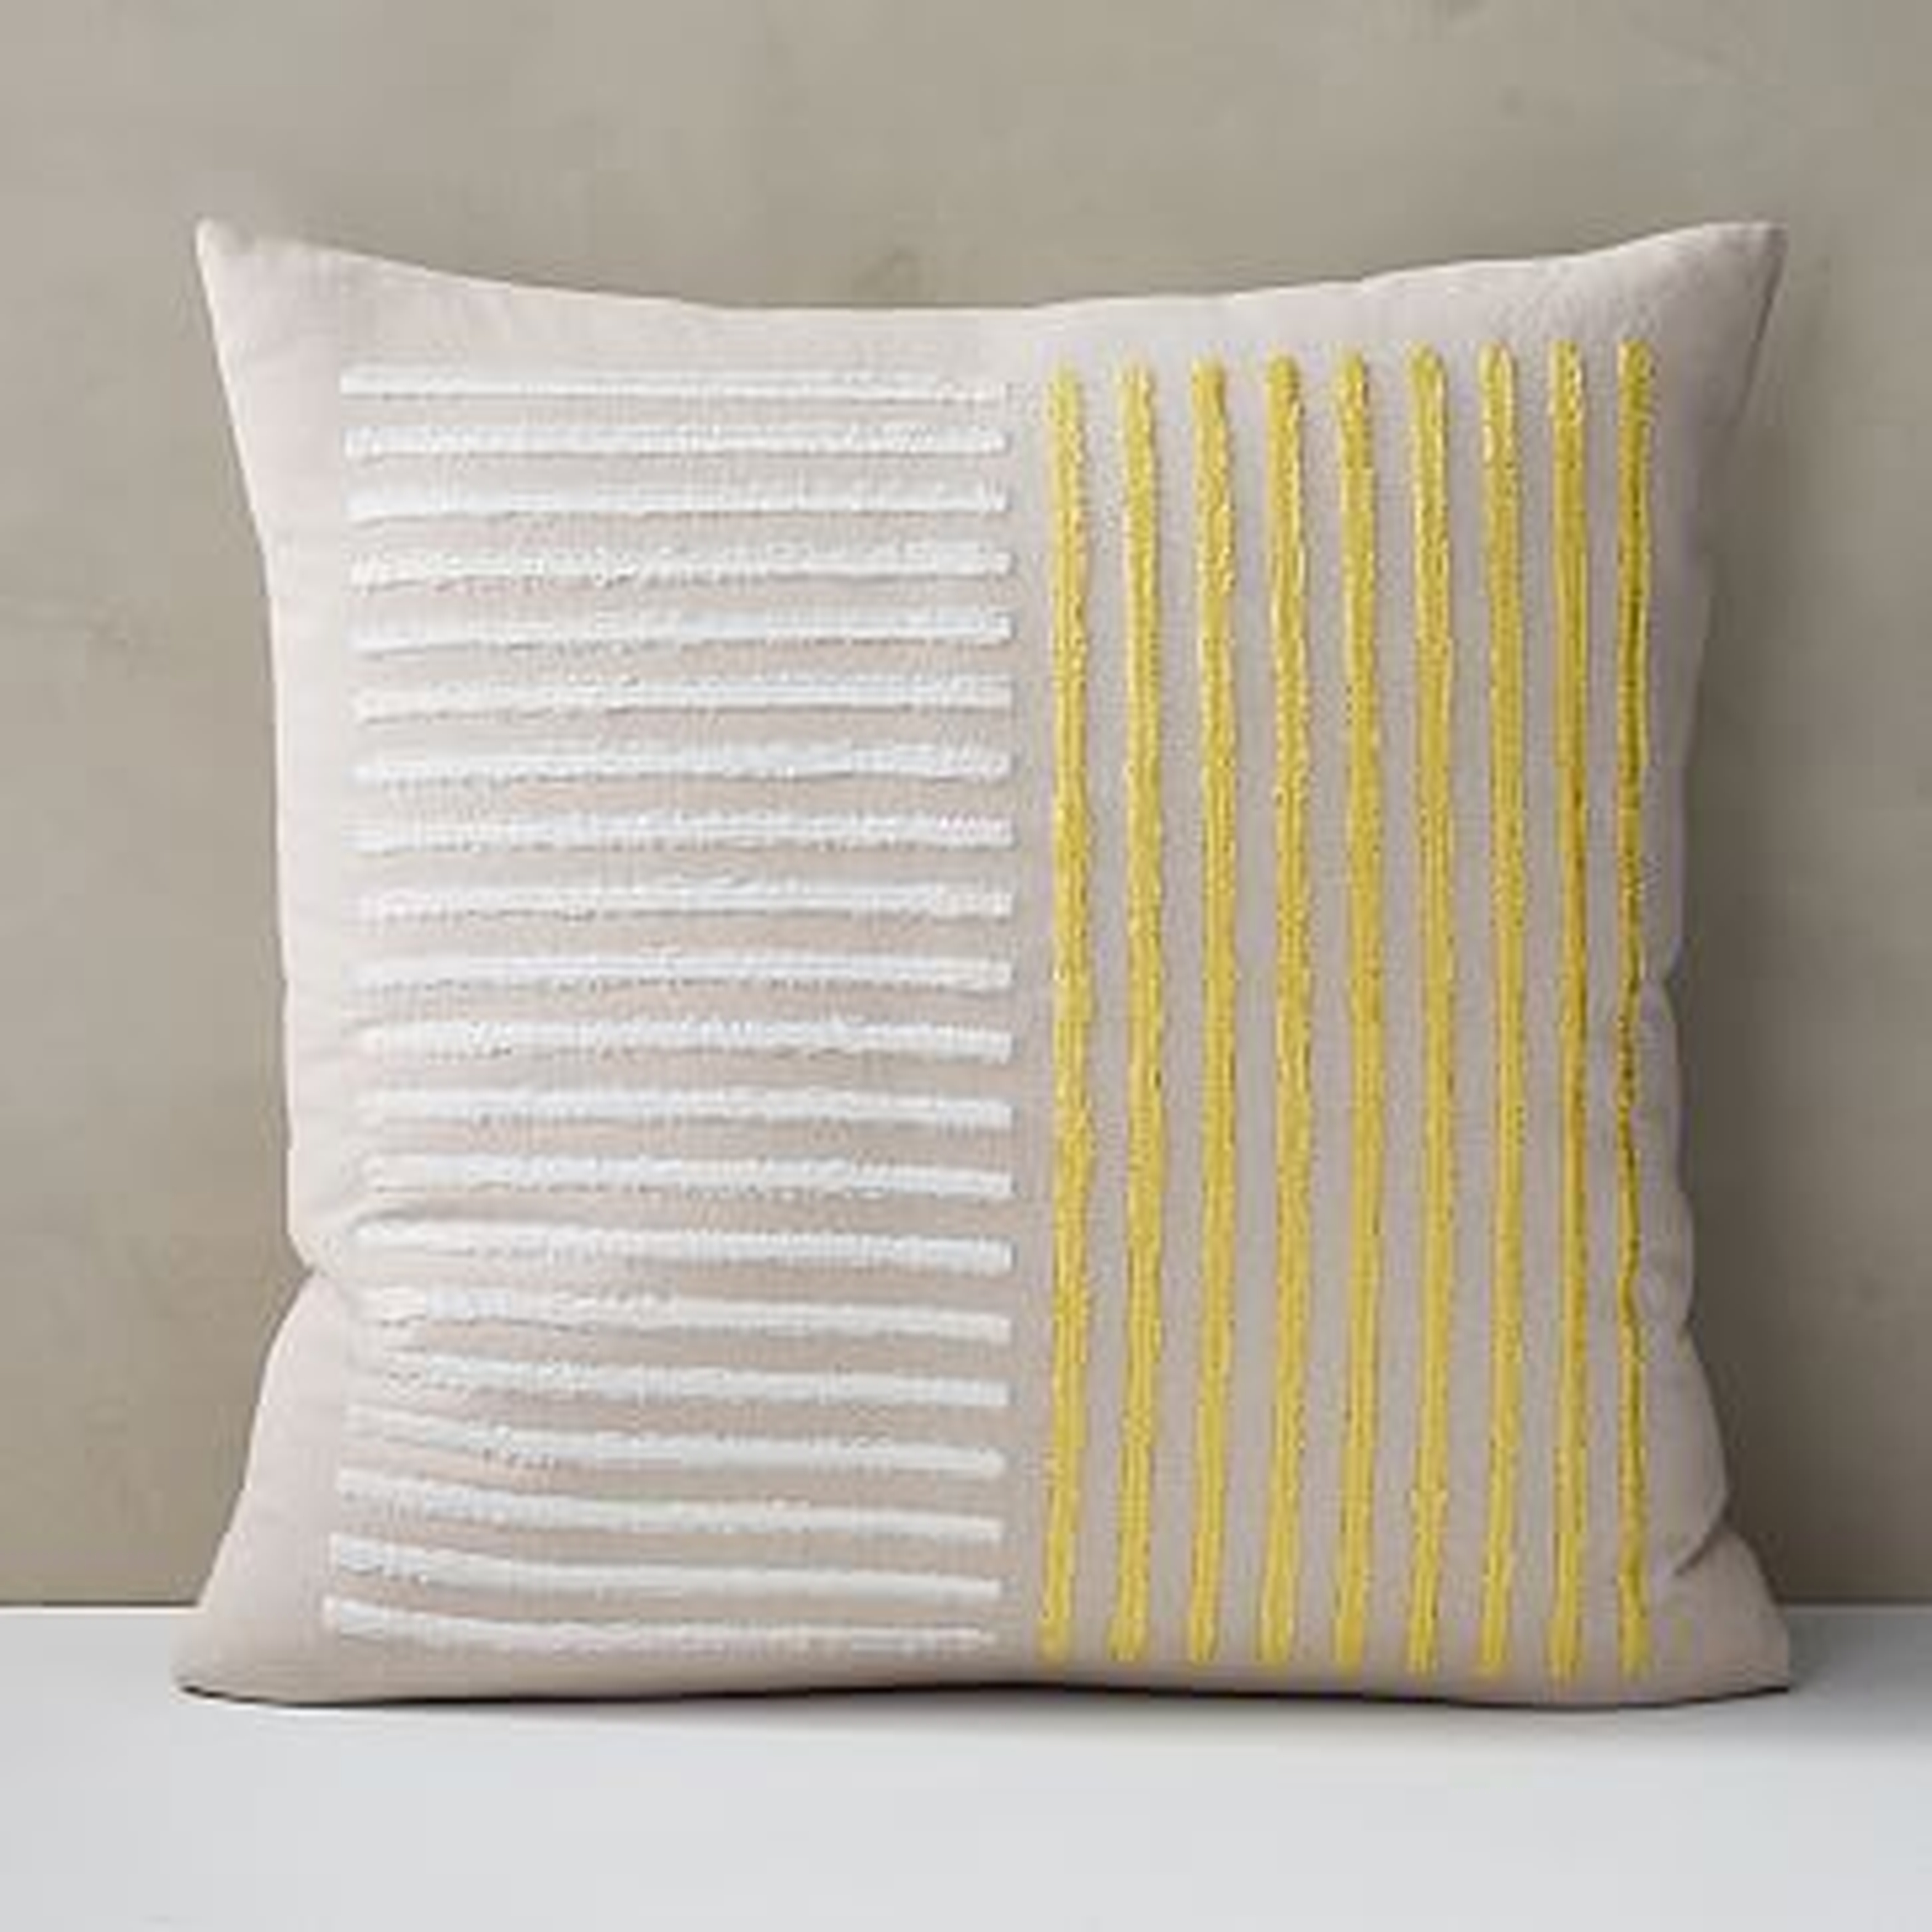 Embroidered Lines Pillow Cover, 24"x24", Belgian Flax - West Elm